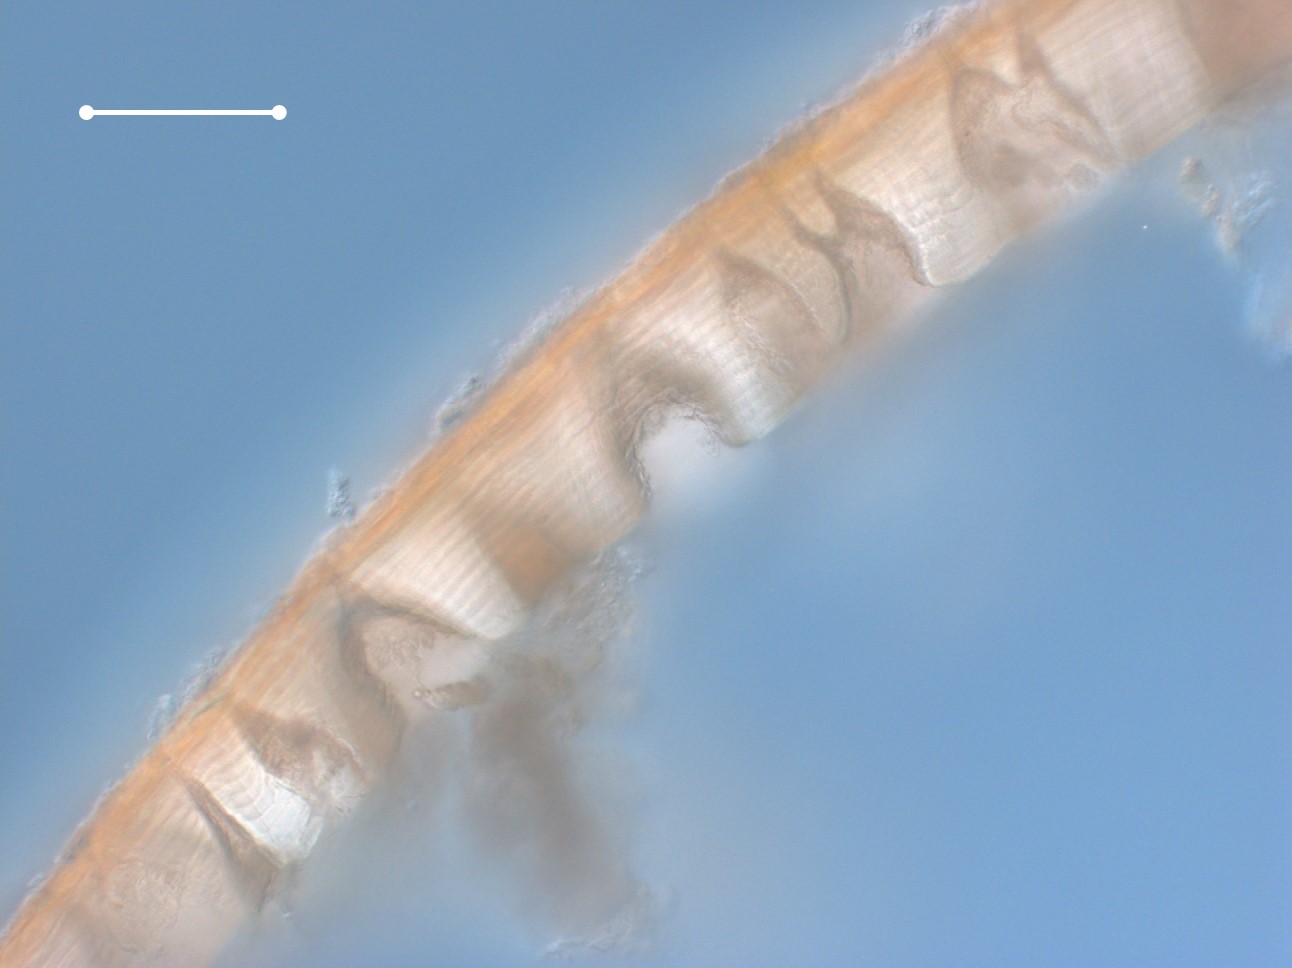  Cross-section of the cuticle of a large  Colossendeis  showing the many pores extending through the cuticle.&nbsp; Specimen viewed with differential interference contrast (DIC) optics at 20x.&nbsp; Scale bar = 100 microns. 